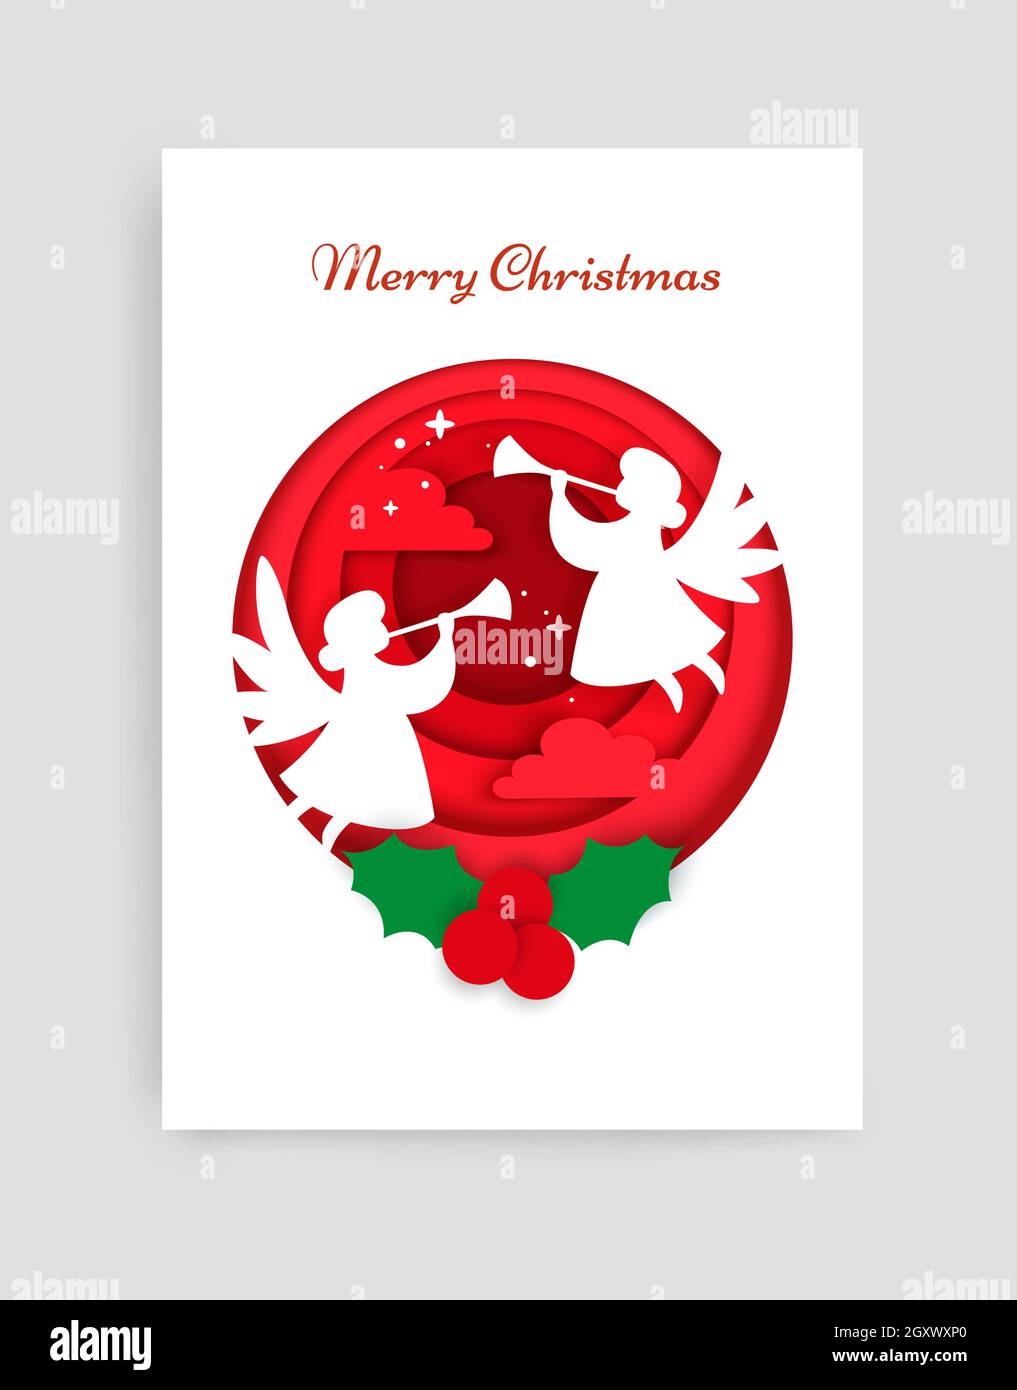 Merry Christmas card vector design template. Paper cut craft style white angel silhouettes, holly berries in circle. Stock Vector